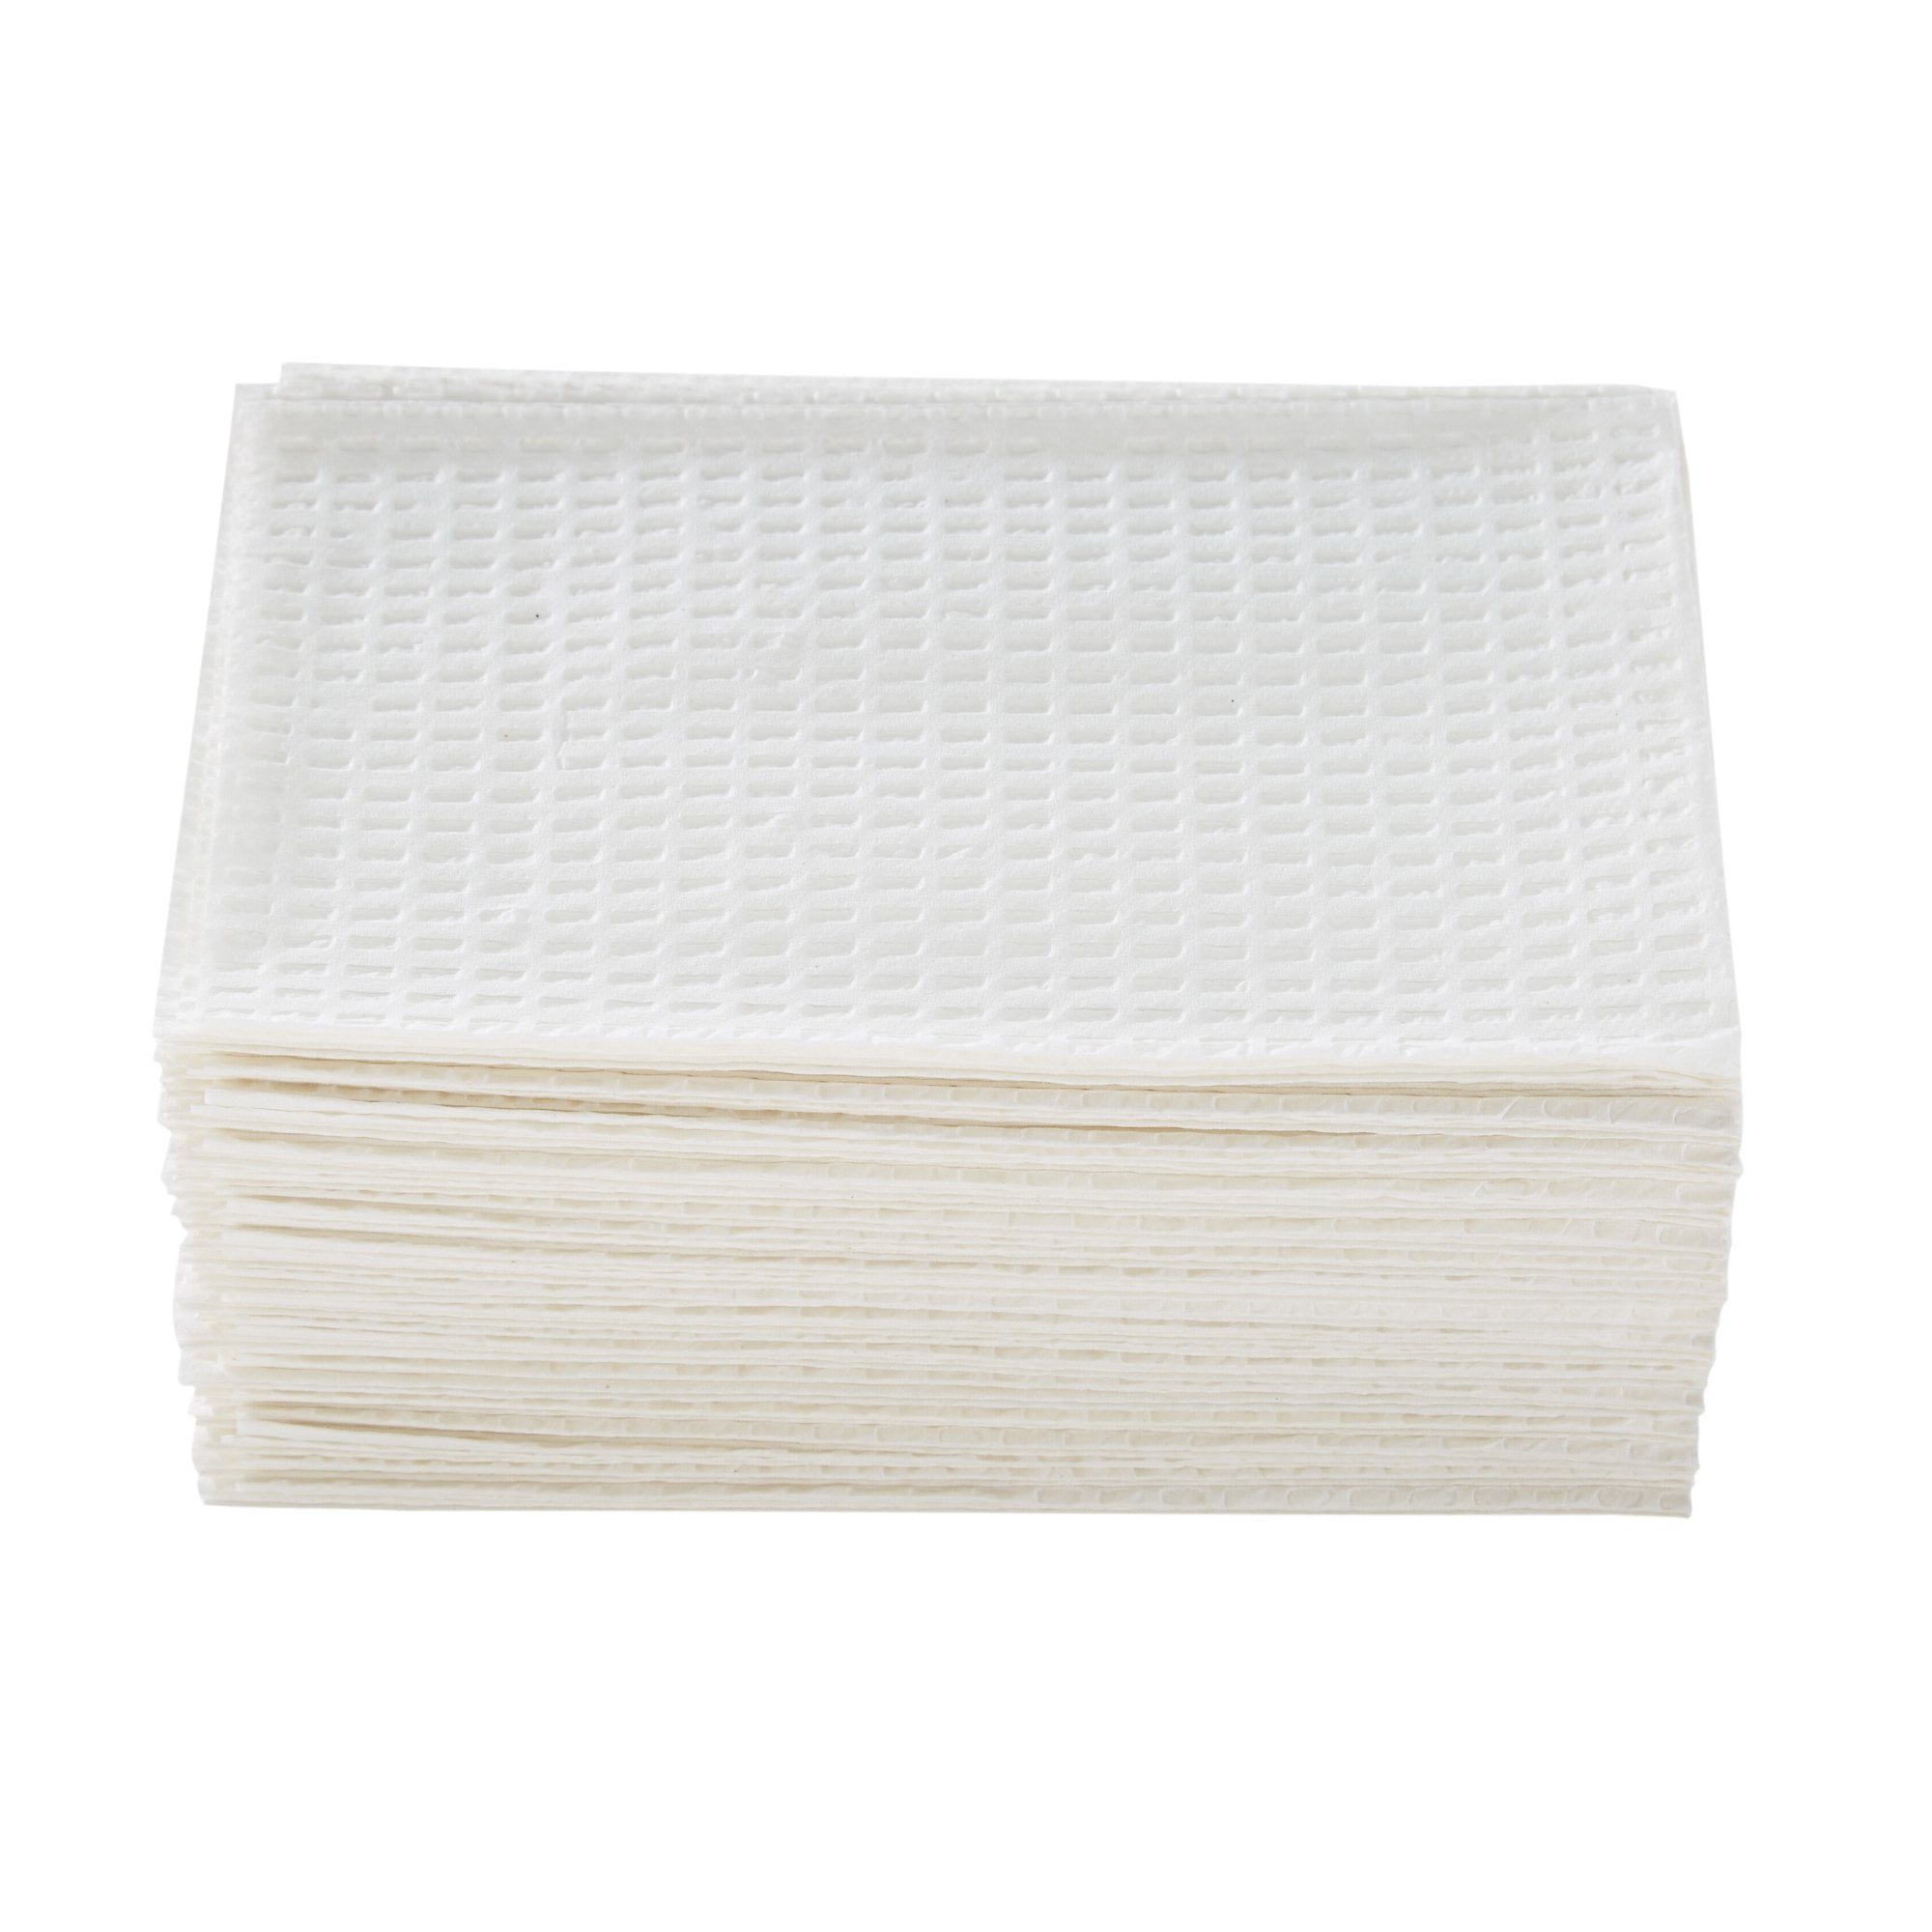 Household>Paper Towels - McKesson - Wasatch Medical Supply